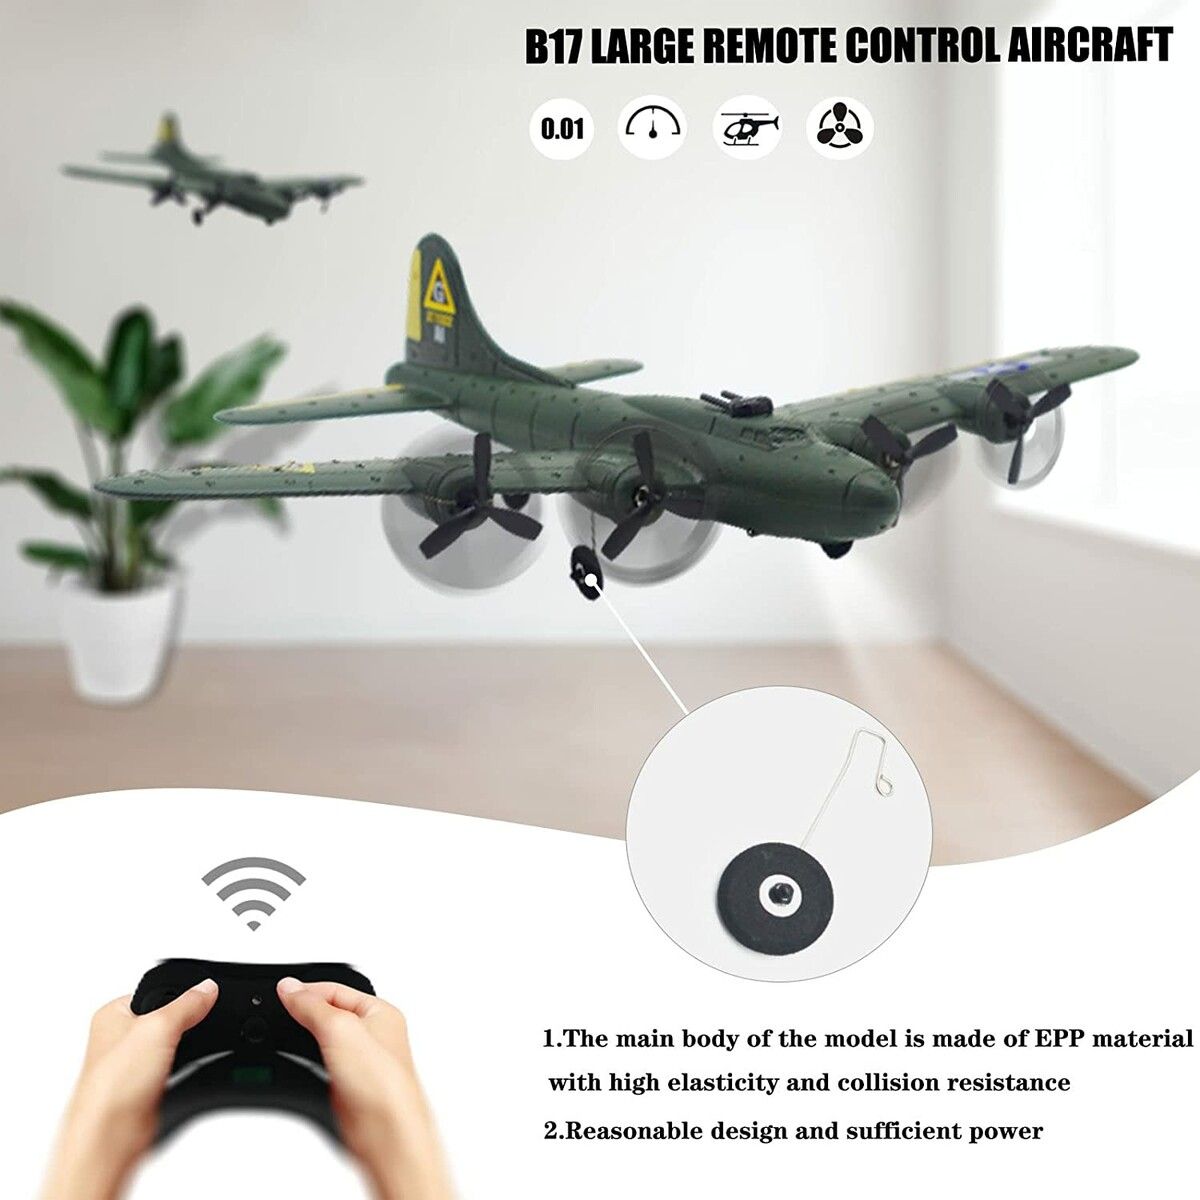 B-17 RC Airplane Ready to Fly, Easy to Fly RC Glider for Kids and Beginners, Hobby Remote Control Airplane for Adults